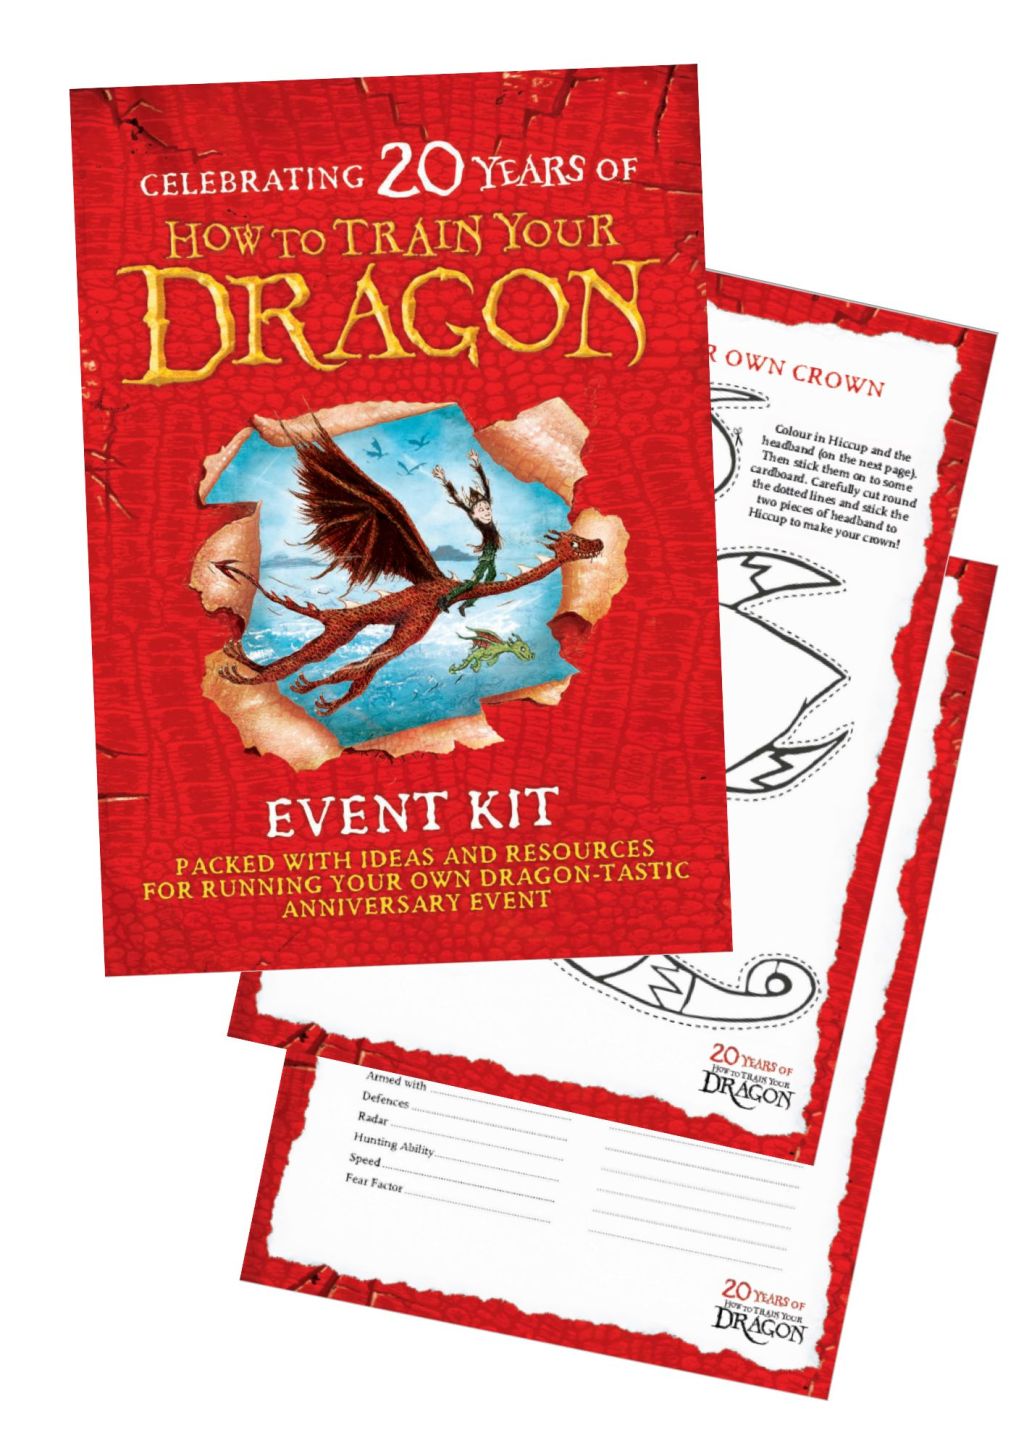 How to Train Your Dragon 20th anniversary event kit